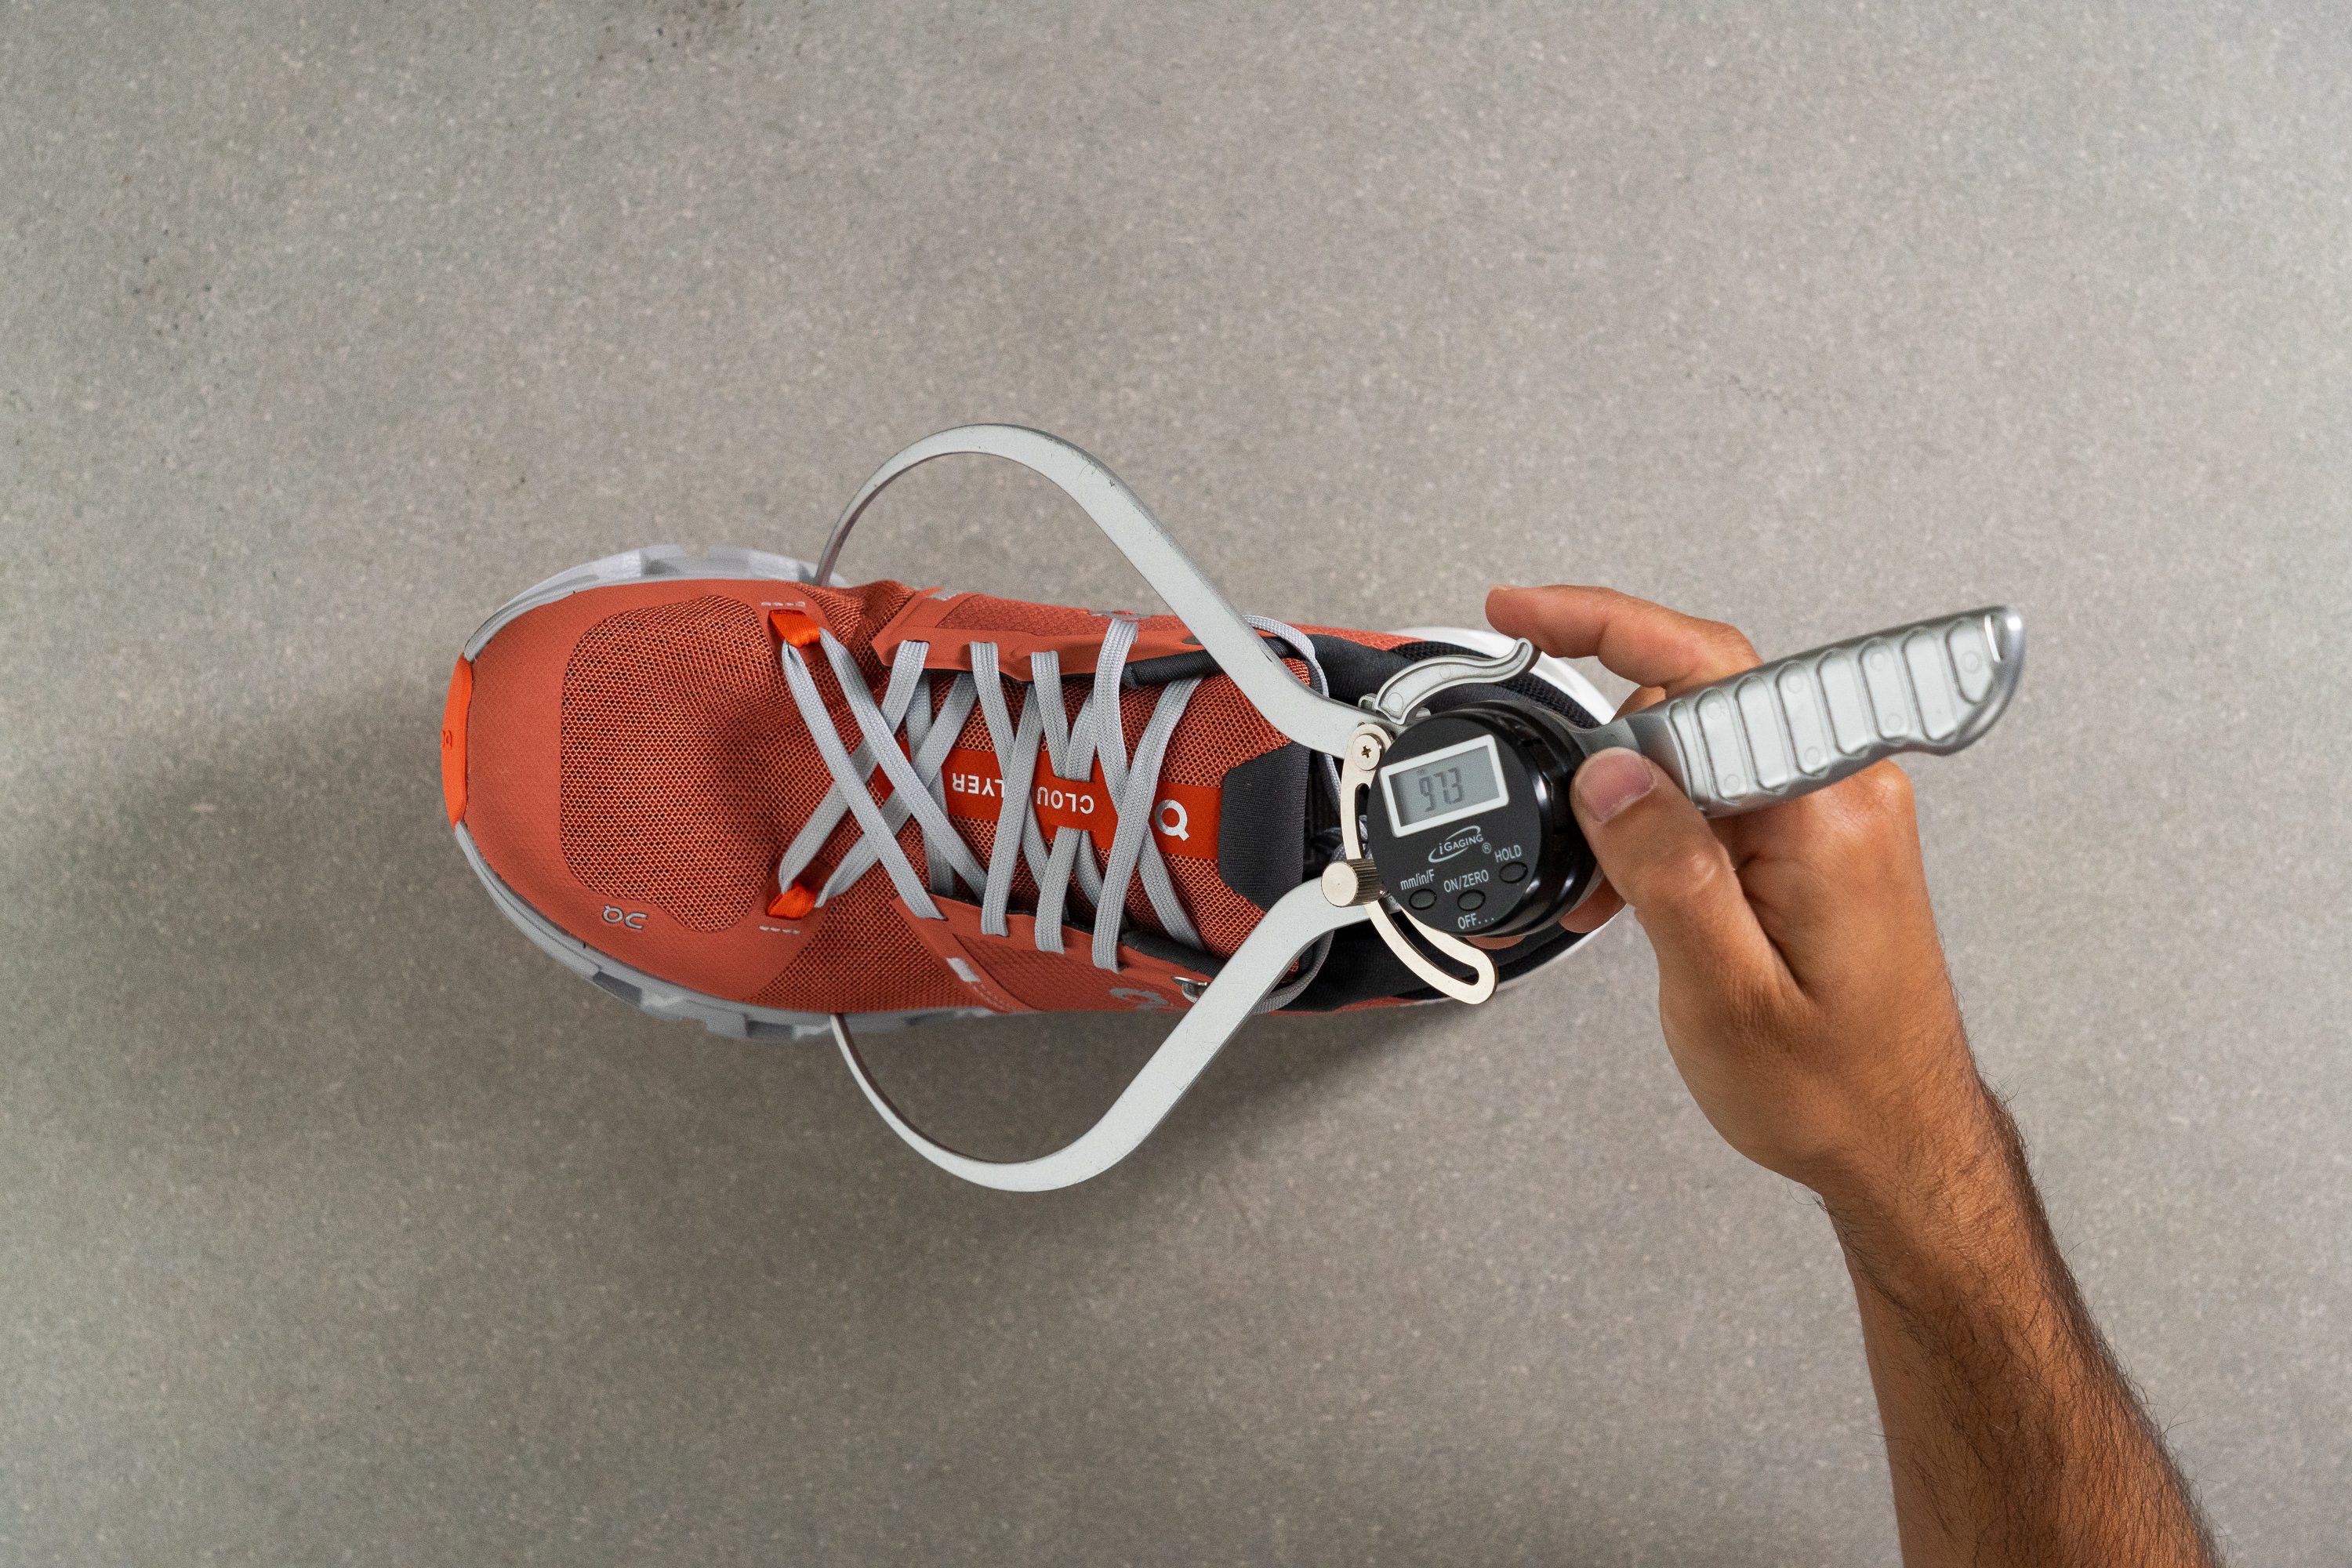 held up, we thought this shoe would be great for solid durability Toebox width at the widest part